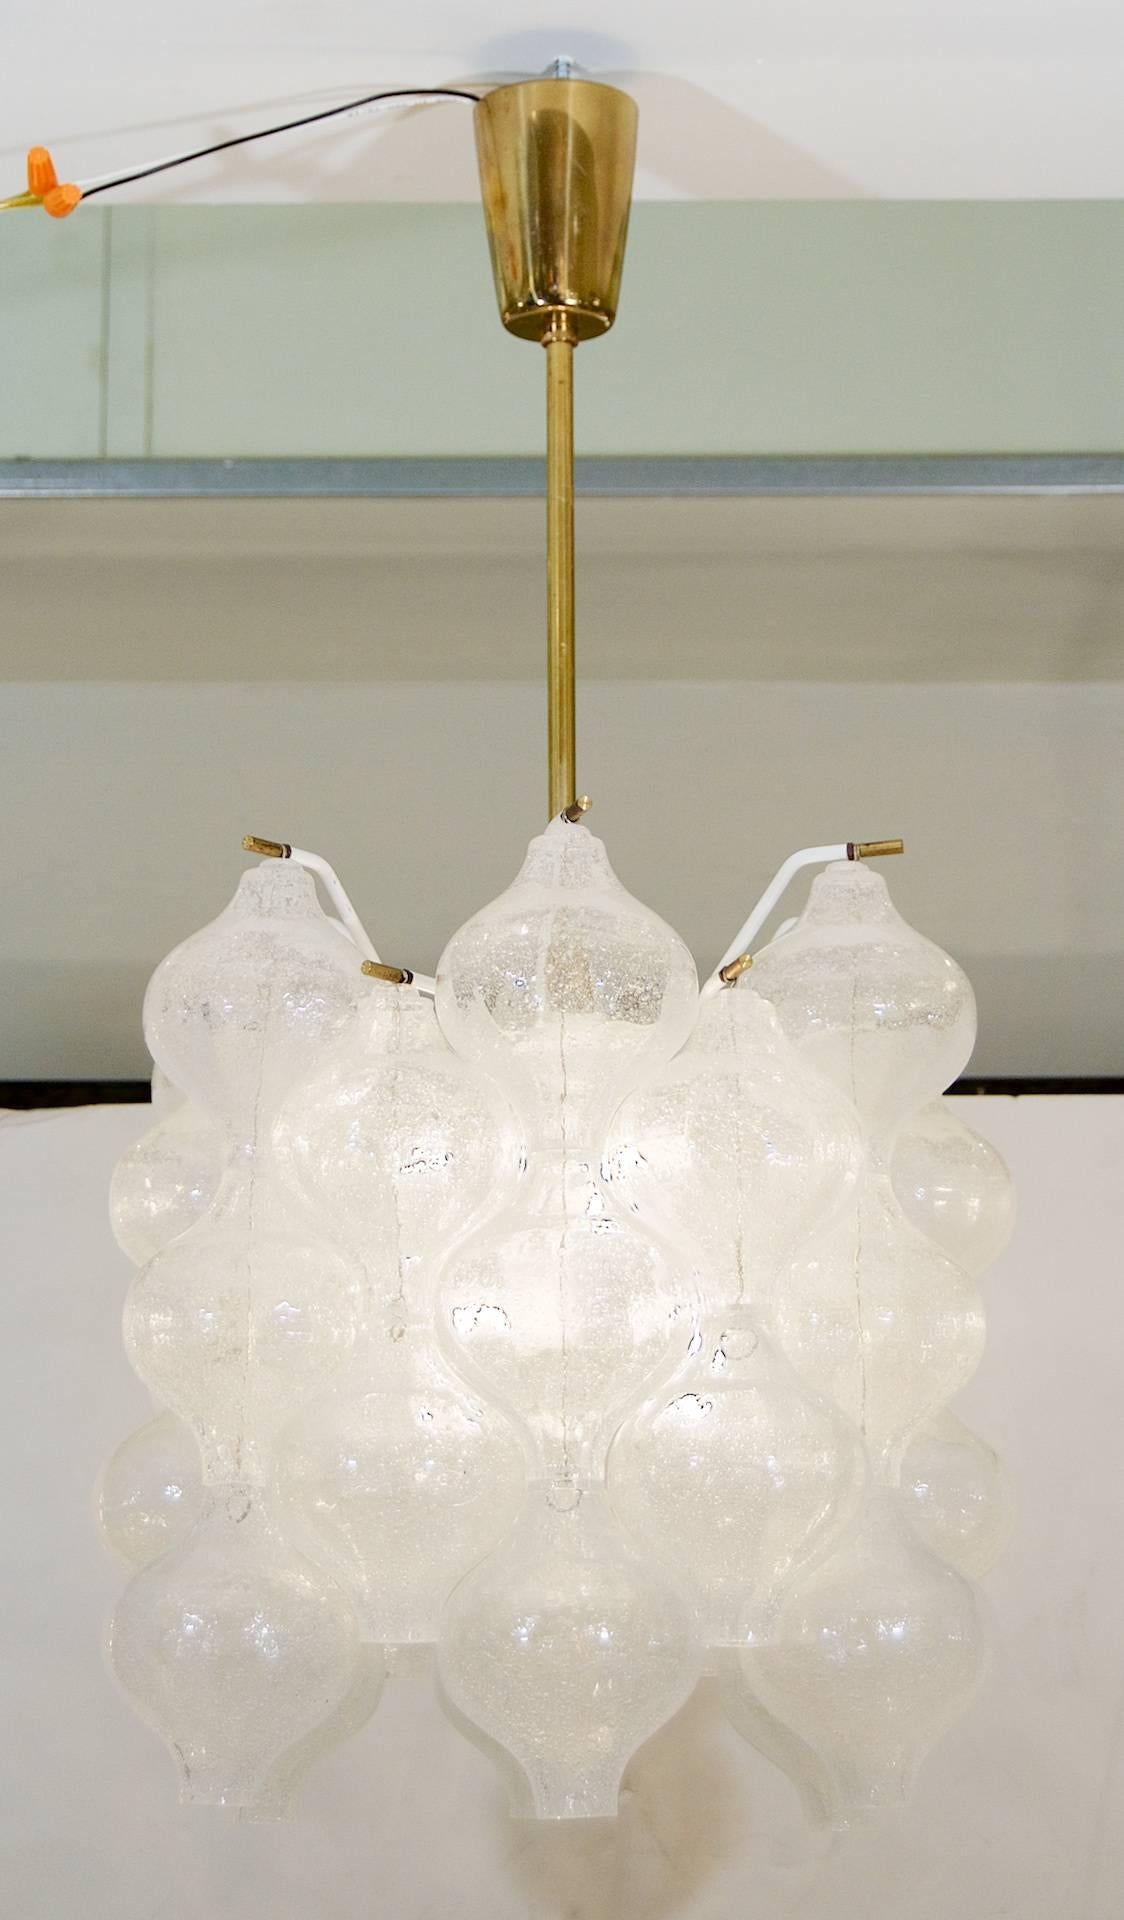 An excellent Kalmar Tulipan glass pattern chandelier, having 31 individually hung pieces of glass in 12 vertically stacked chains. Each piece of handblown glass is wire suspended on brass pins, with the central body in enameled white.

Six E-14